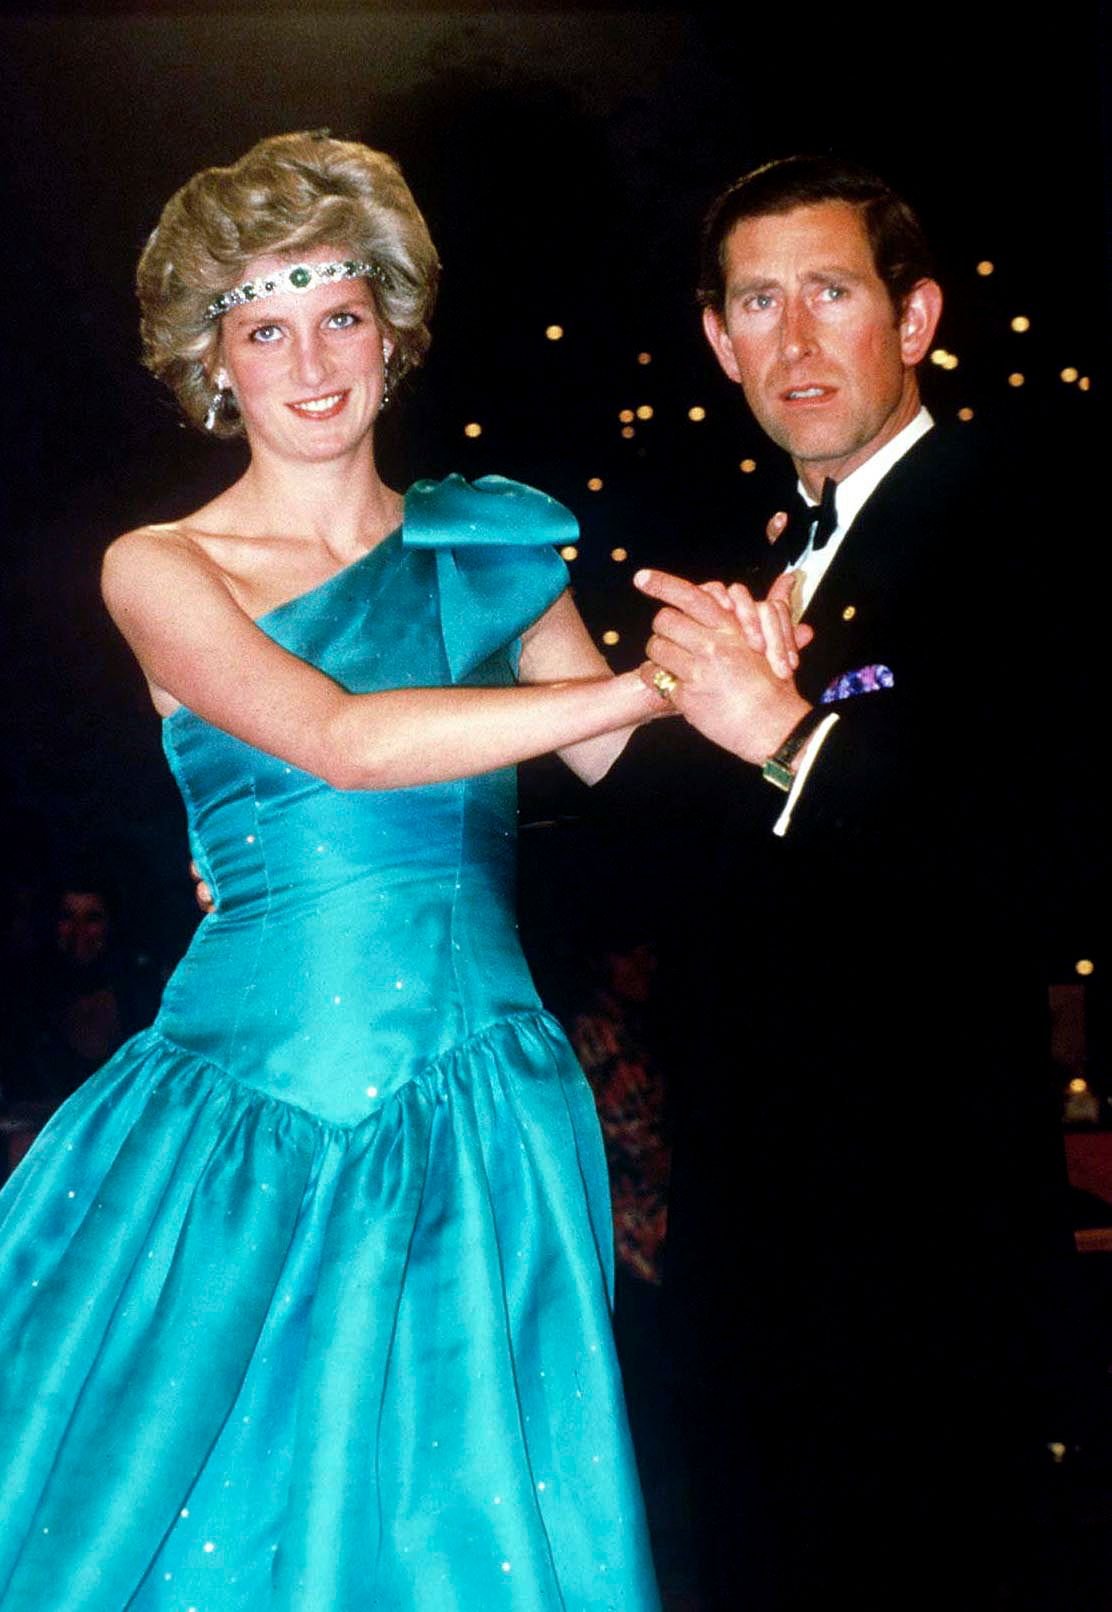 Prince Charles dancing with Princess Diana, In Melbourne, at their Official Tour Of Australia on October 01, 1985 | Photo: Getty Images